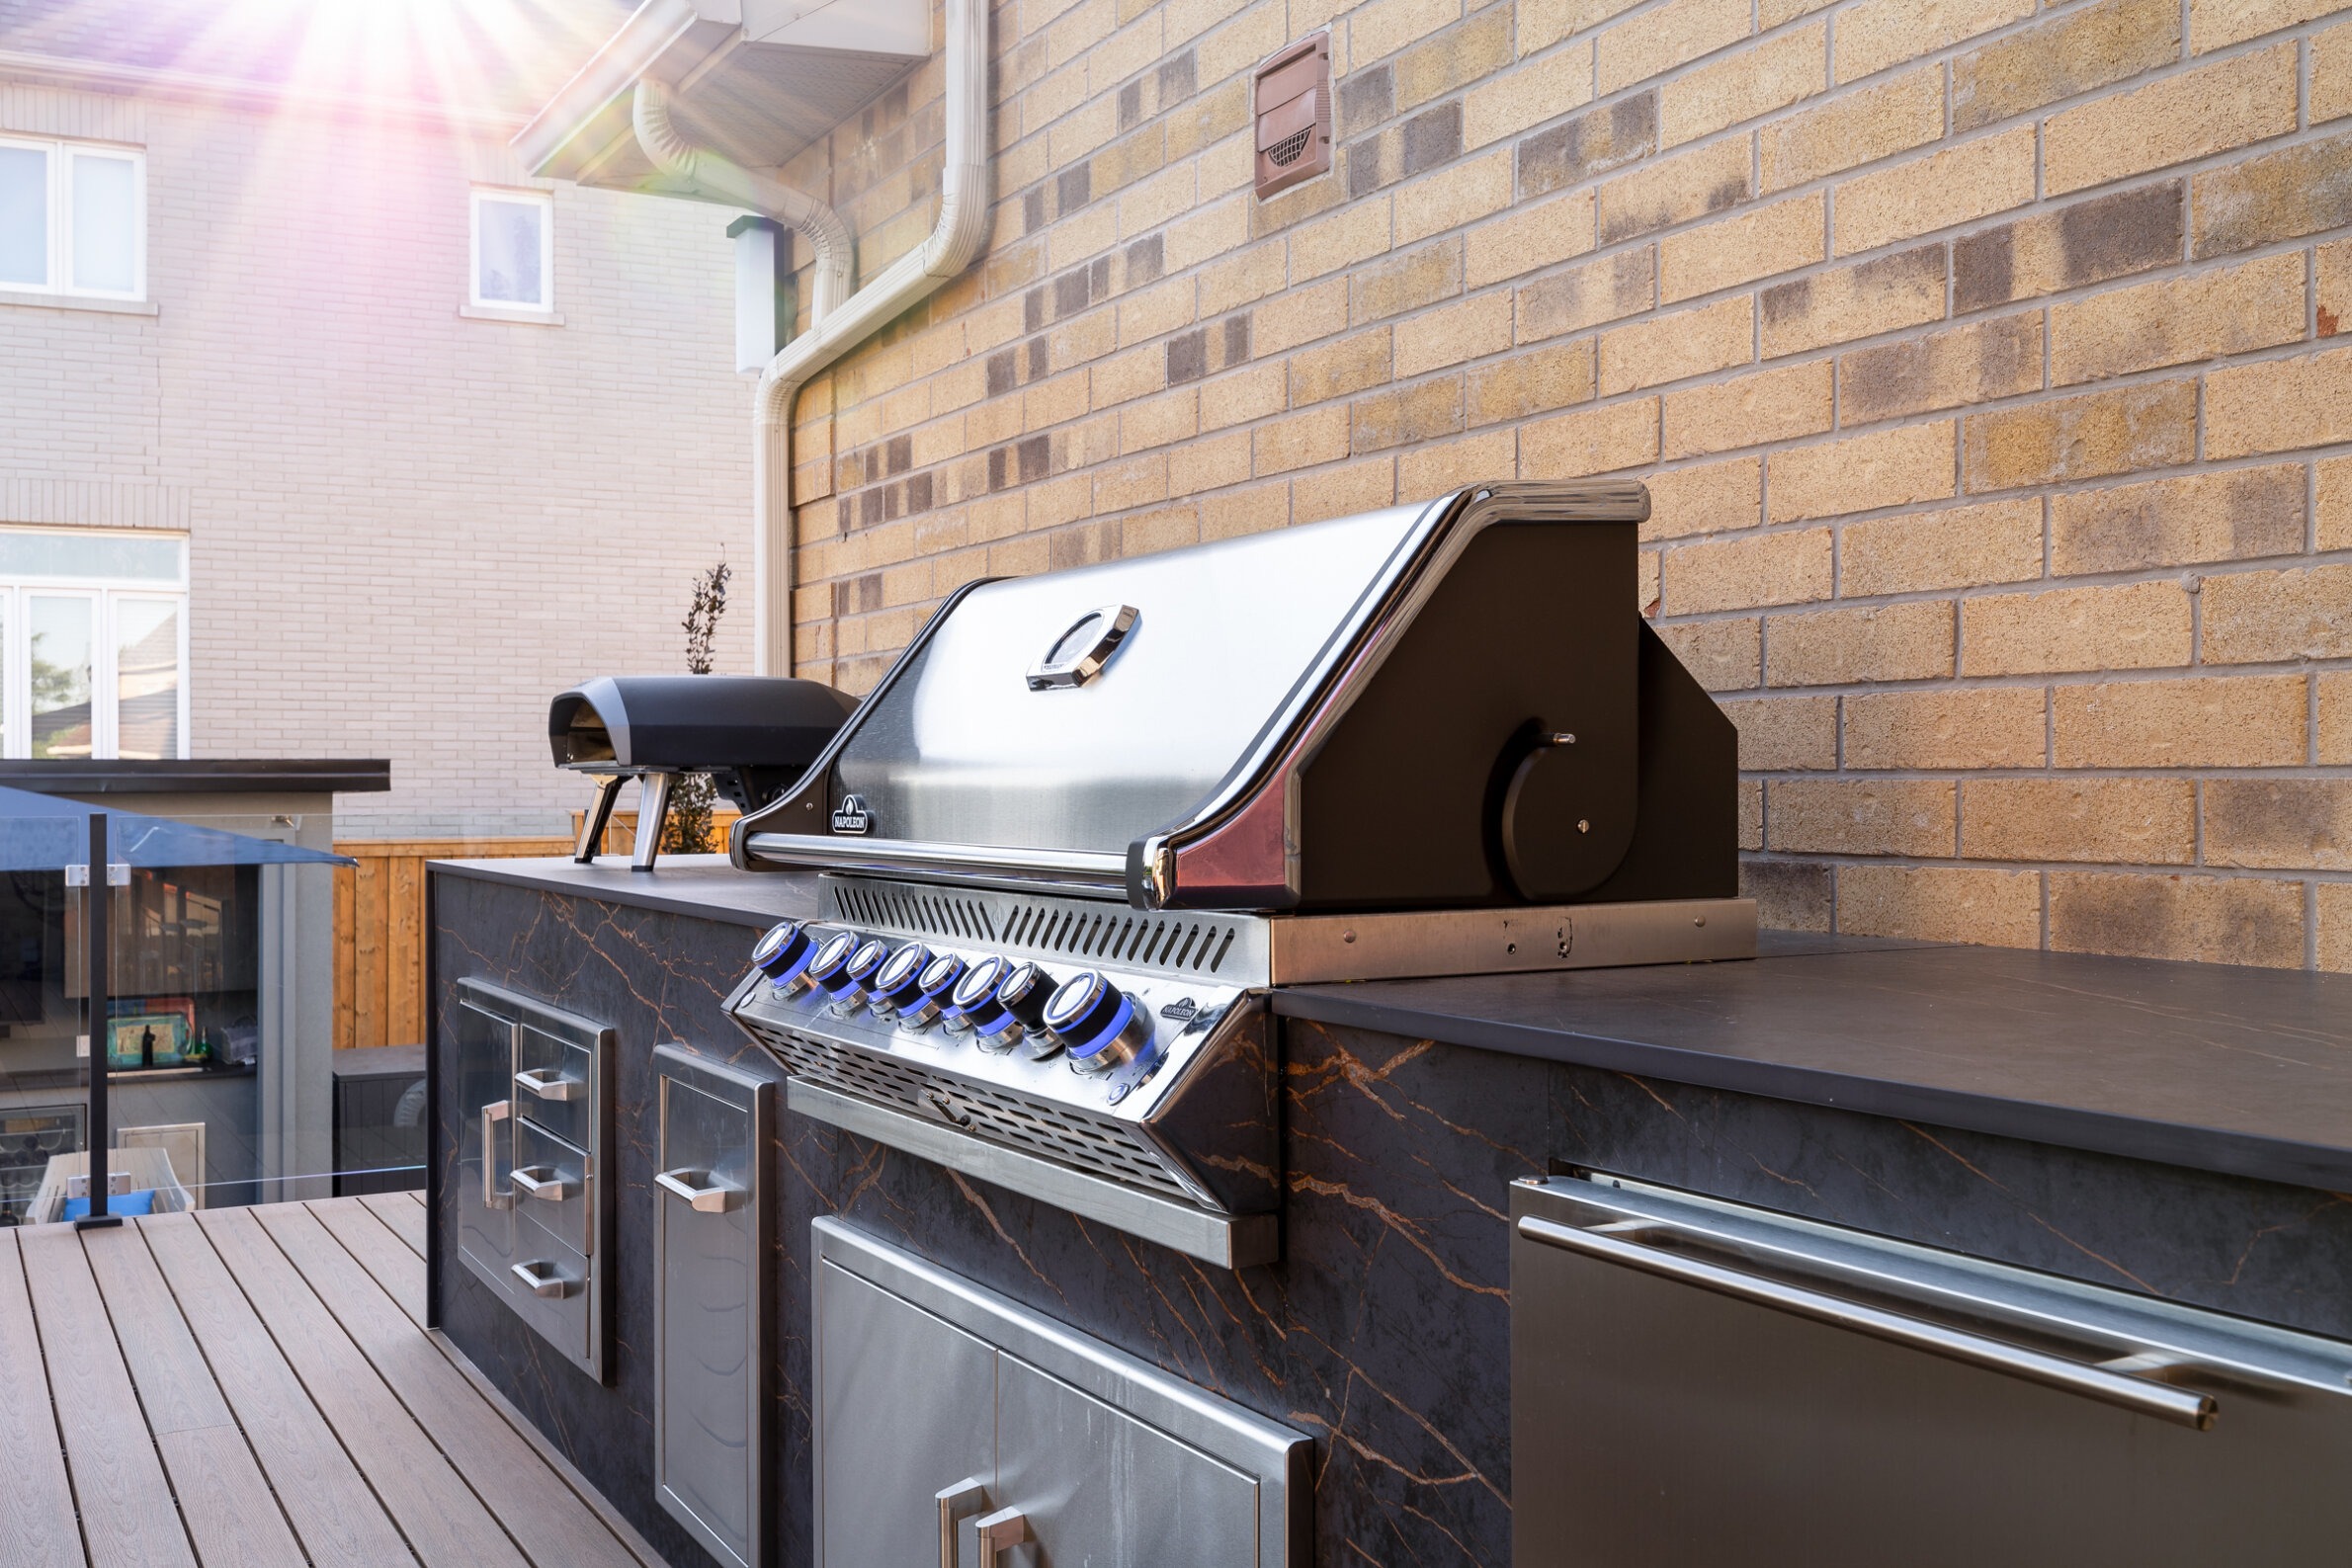 An outdoor kitchen with a modern gas grill and storage cabinets set against a brick house. Sunny weather casts a warm glow.